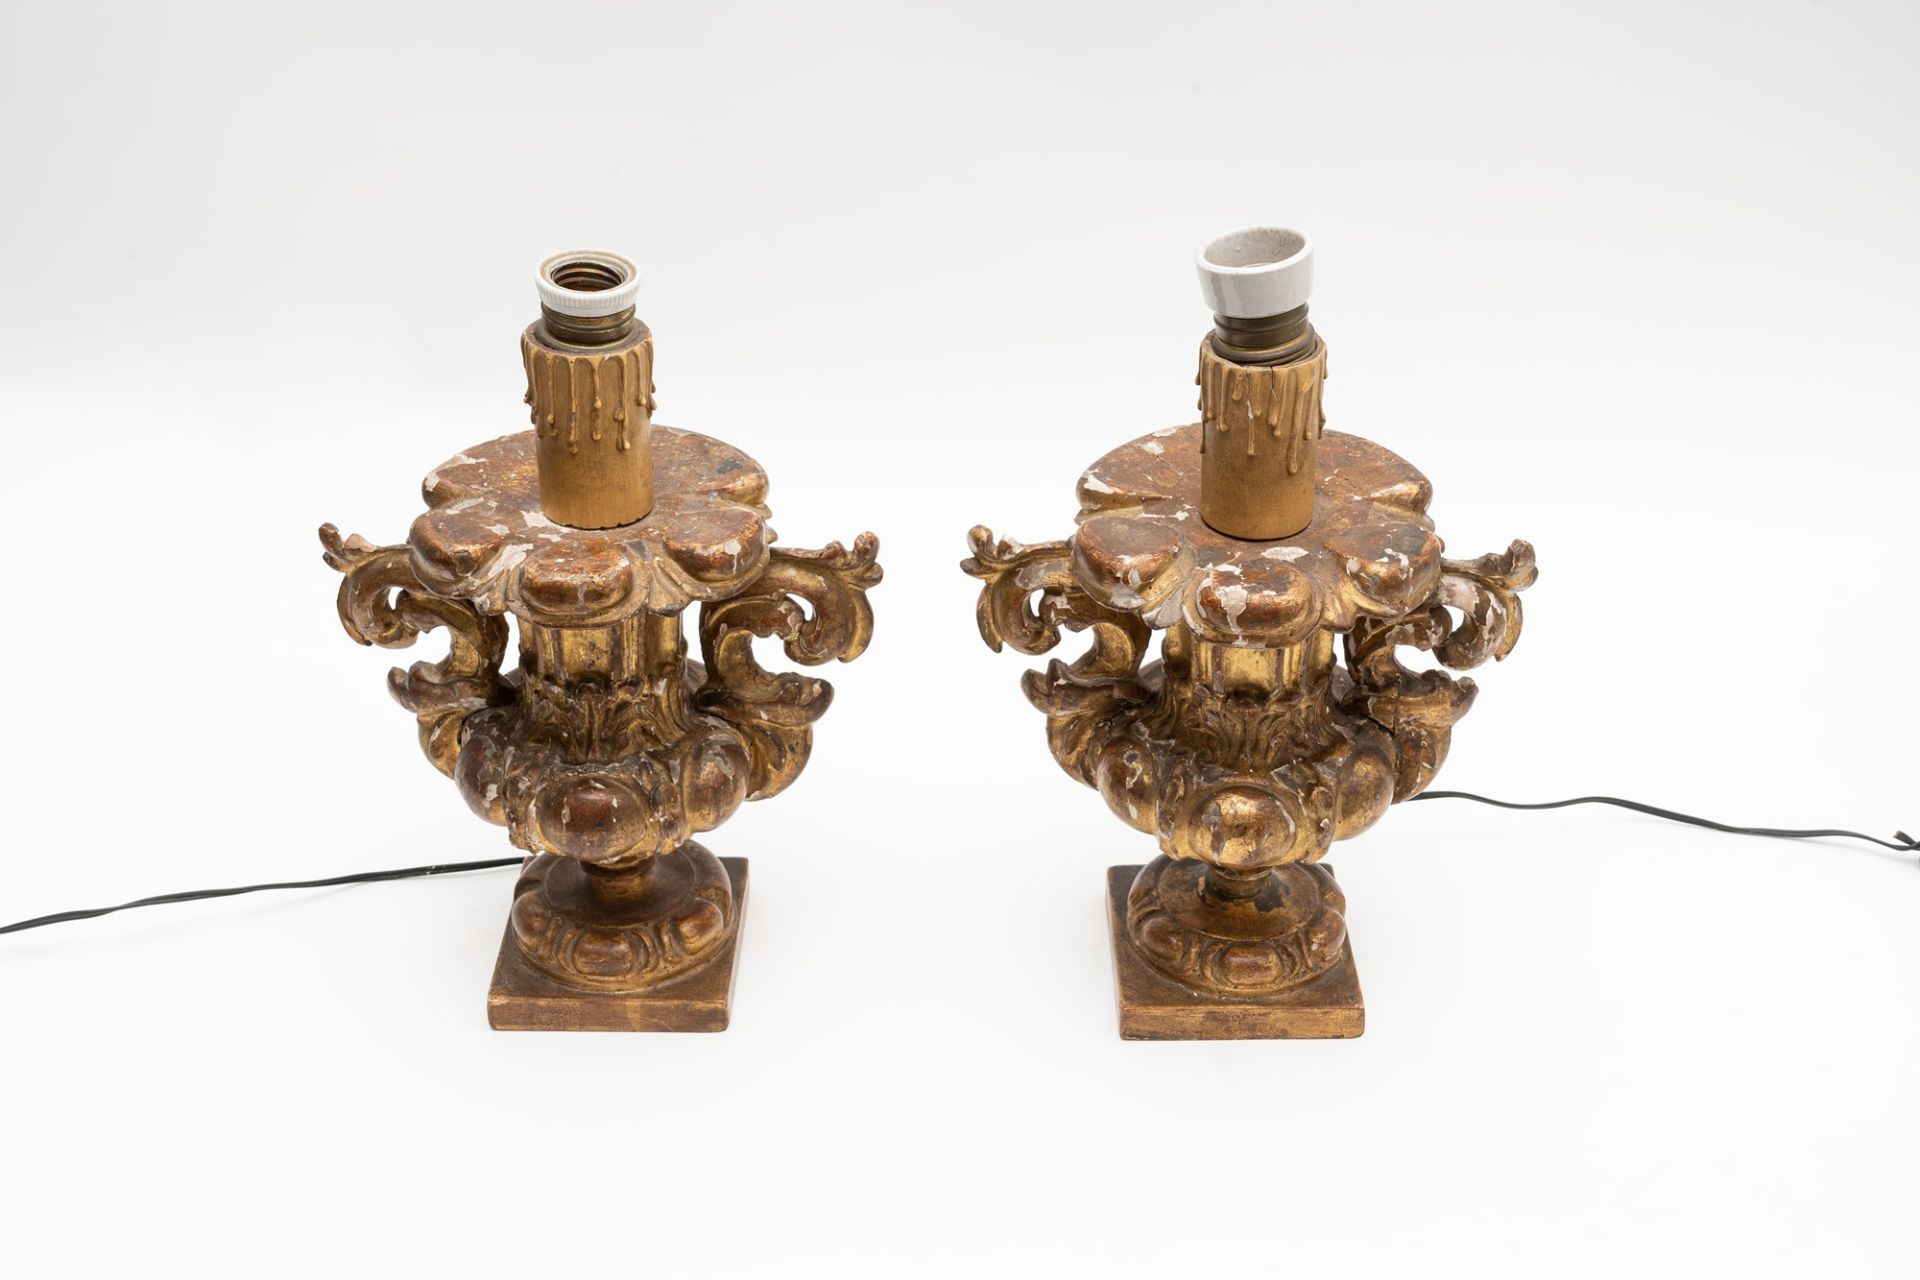 Two carved and gilded wooden candle holders, 18th century